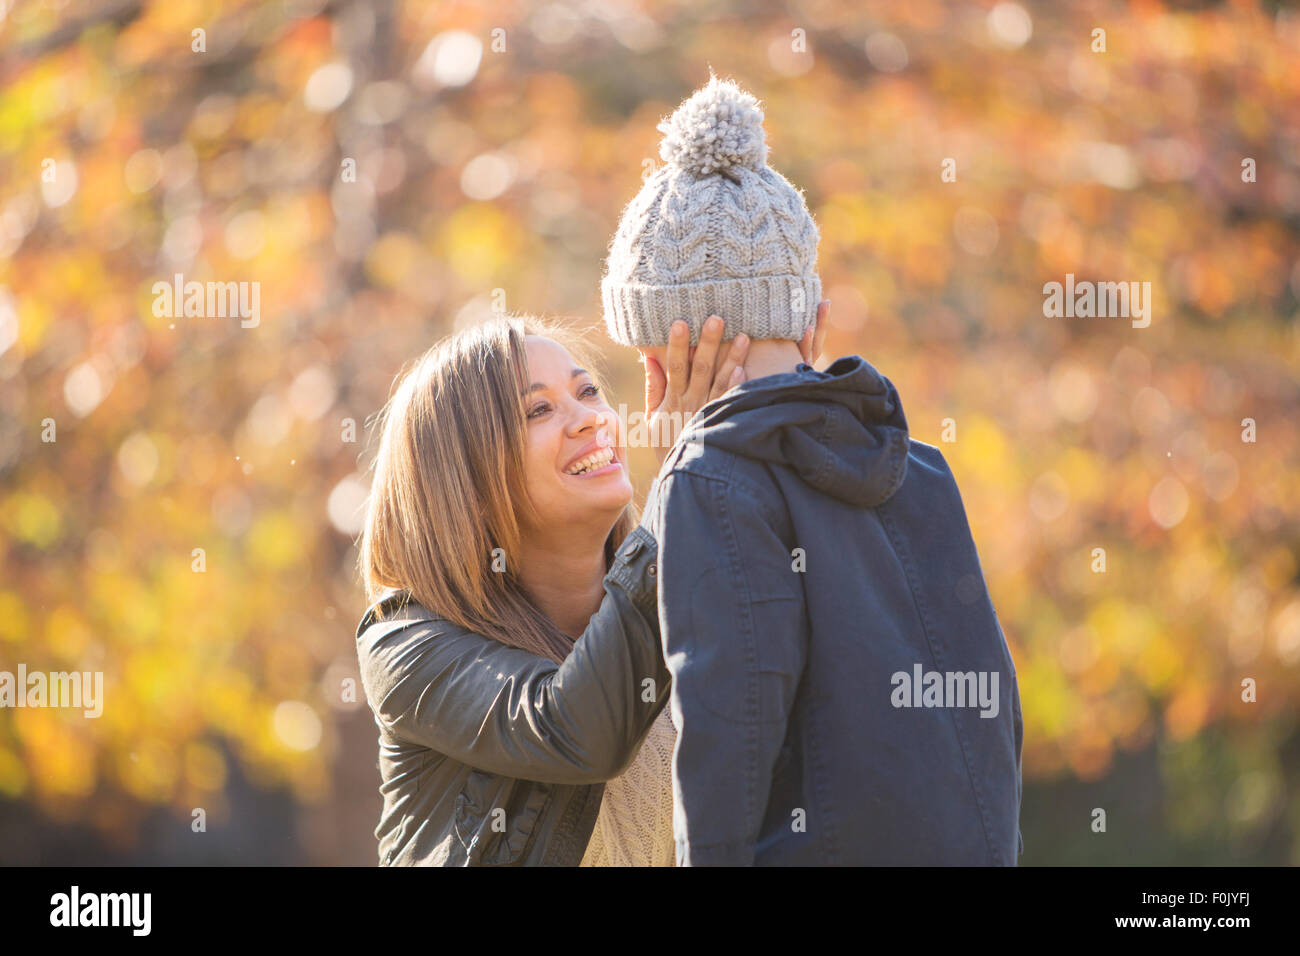 Affectionate mother touching son’s face outdoors Stock Photo